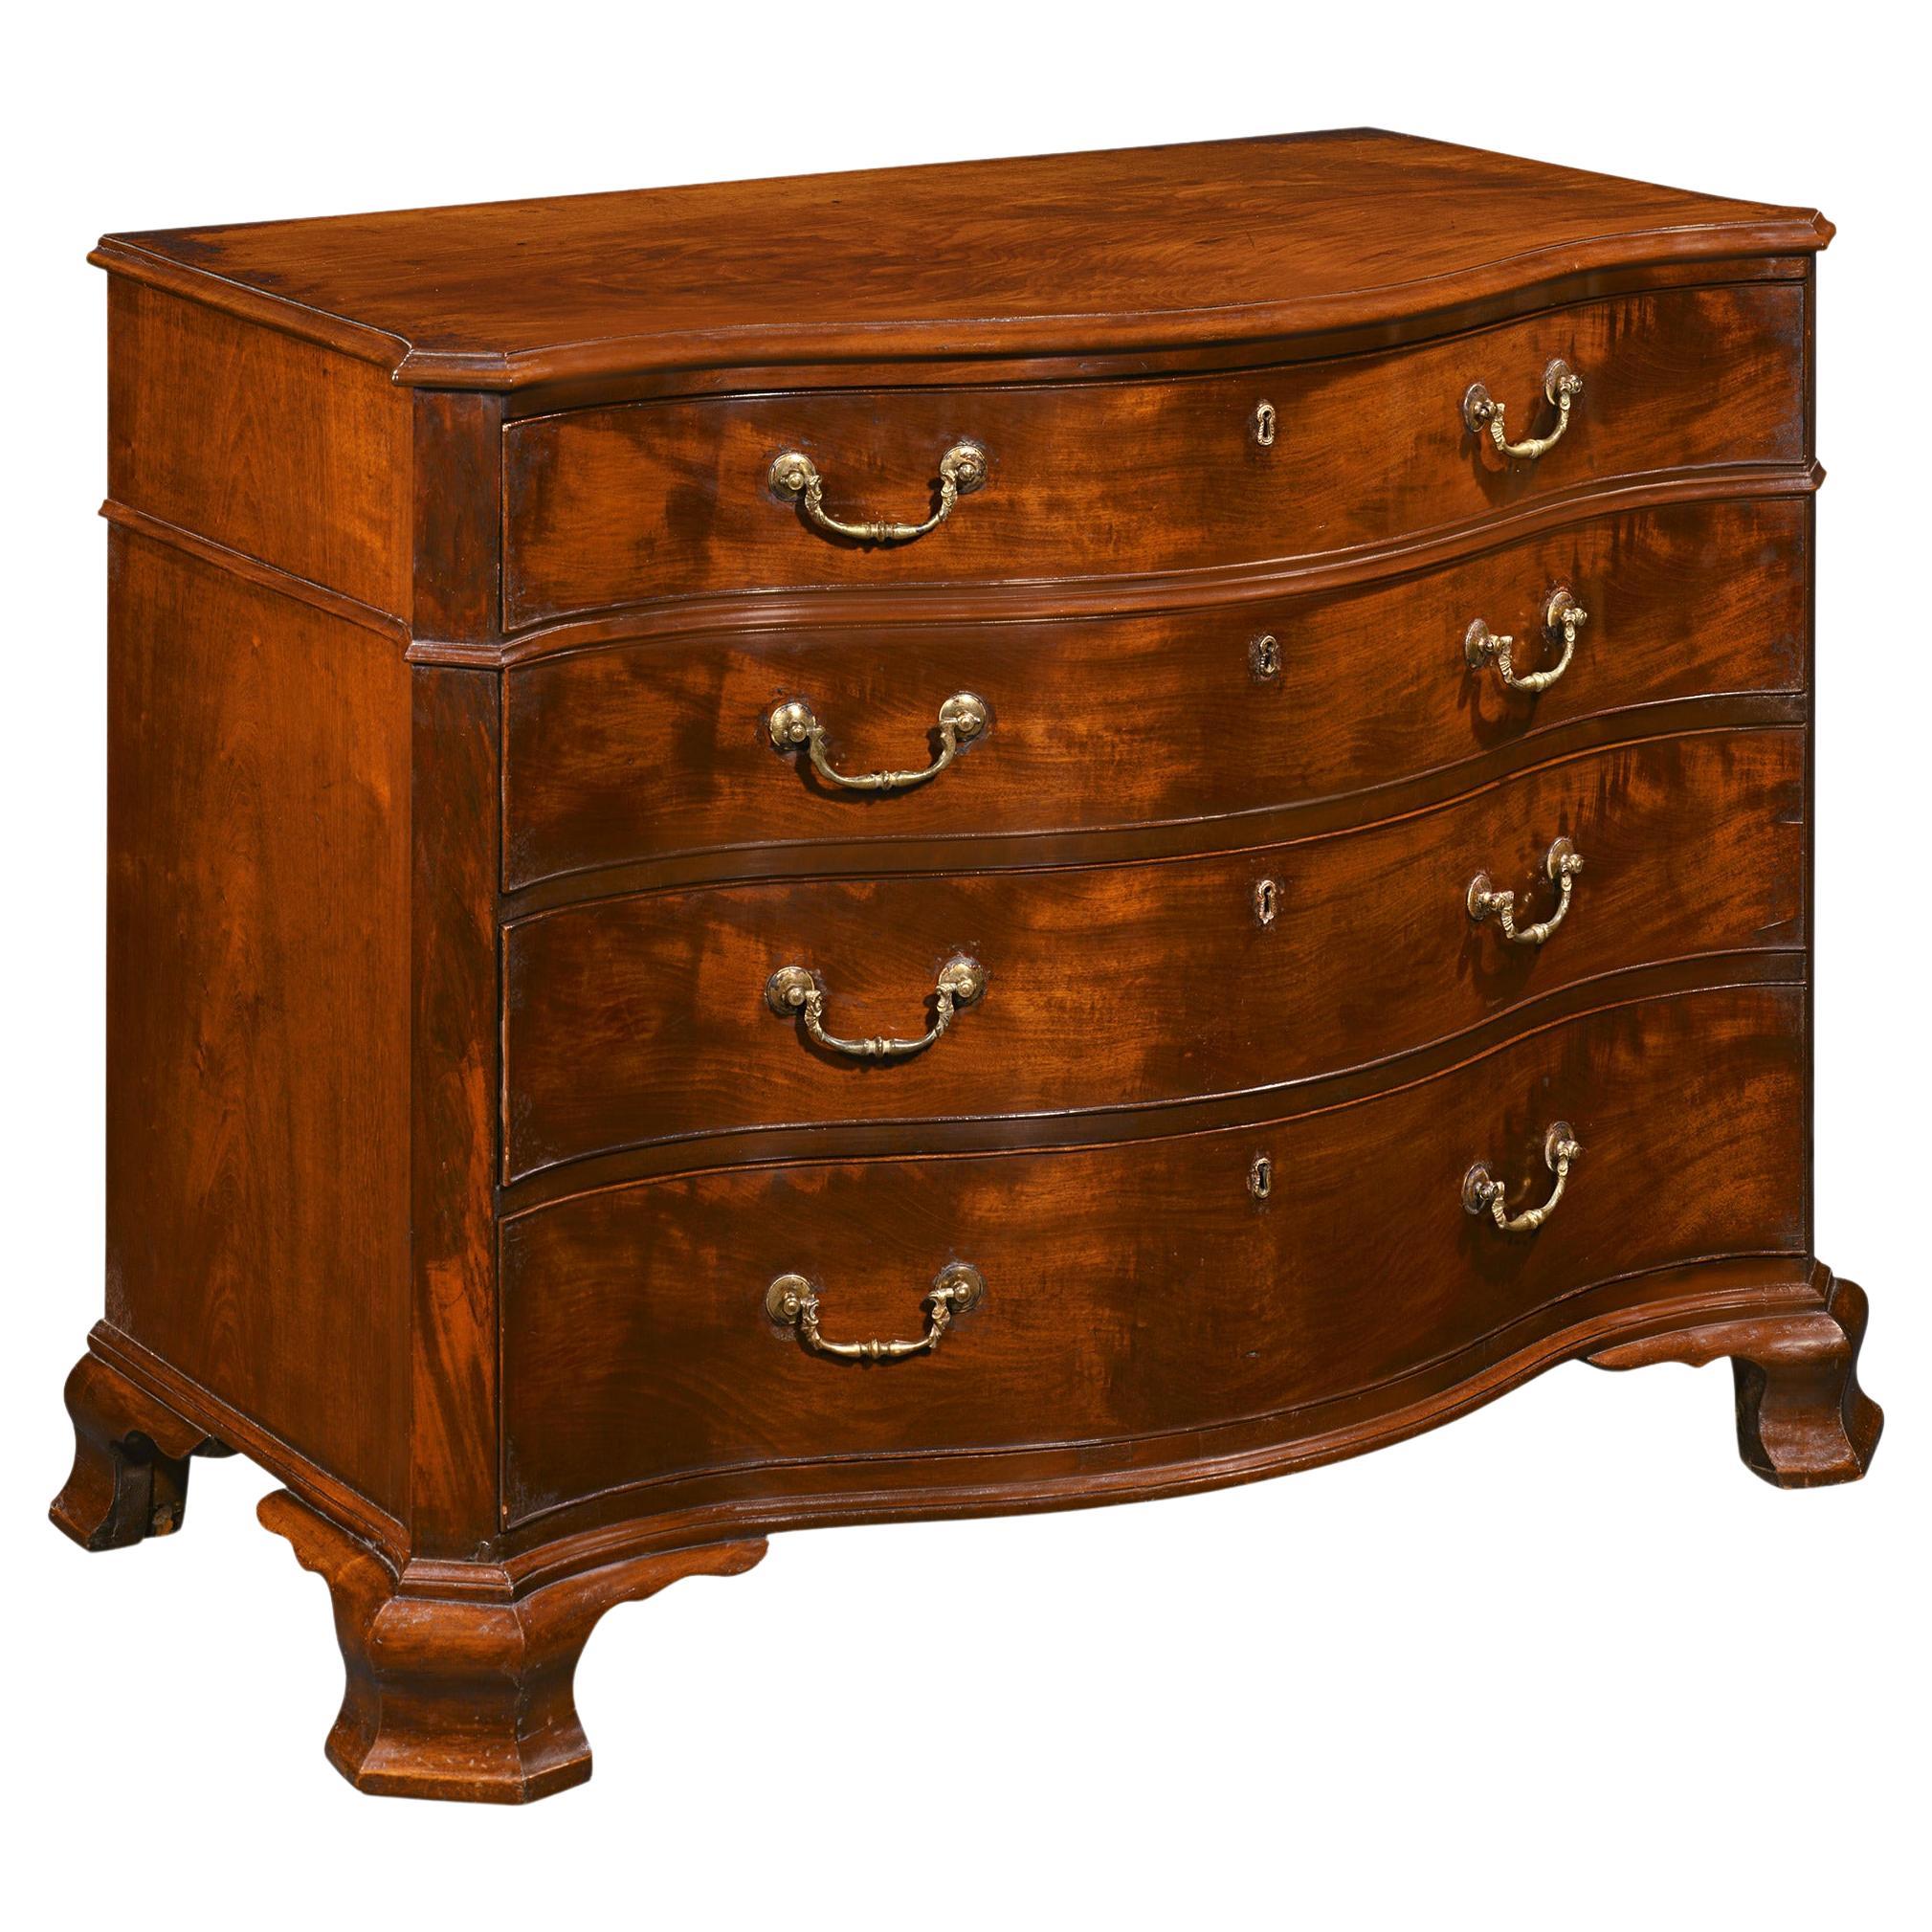 George III Chippendale-Period Serpentine Commode